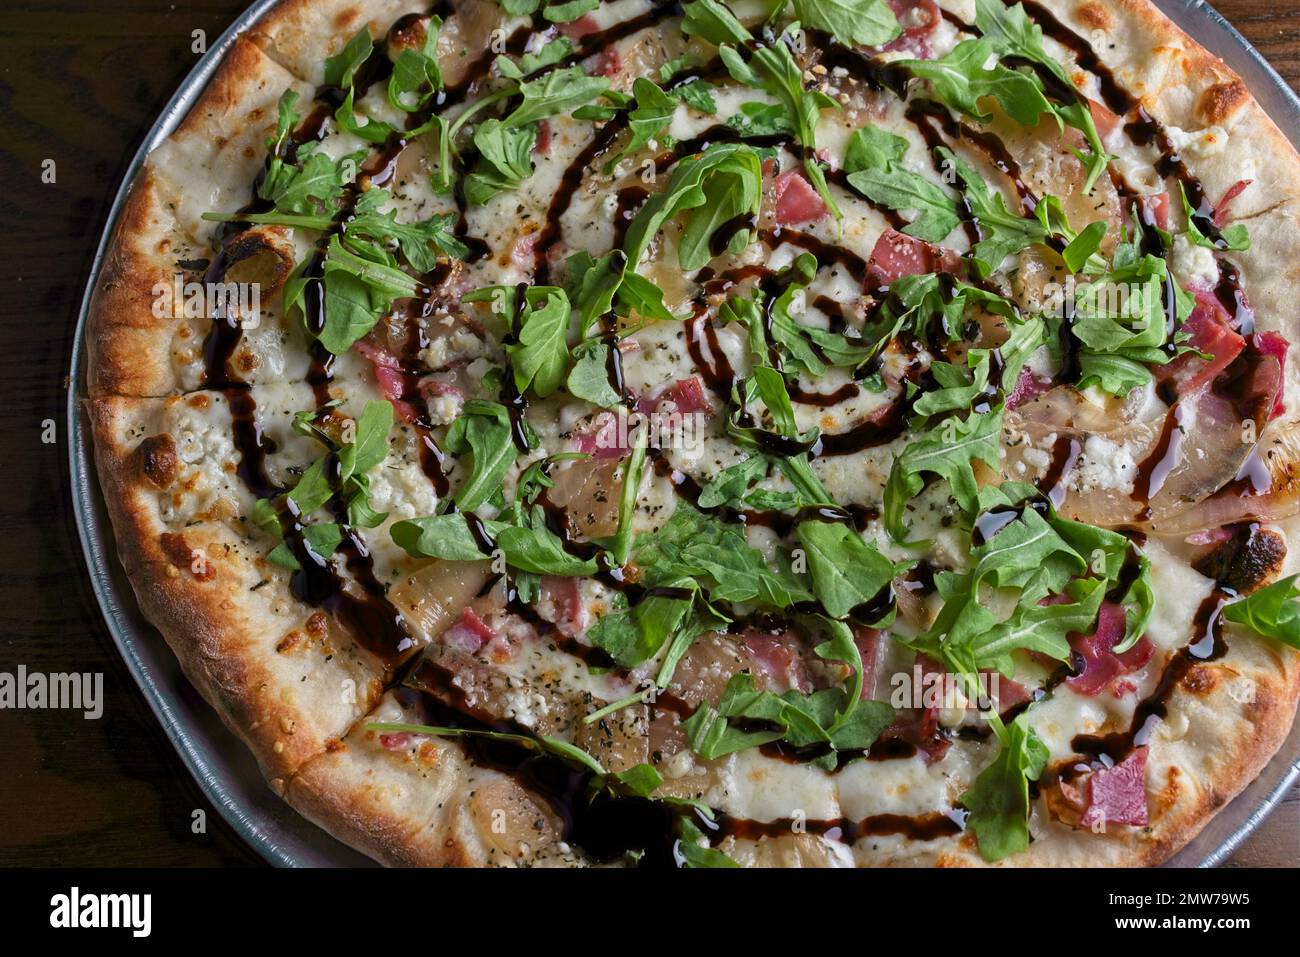 Gourmet pizza with garlic cream sauce, prosciutto, caramelized onion, goat cheese. Finished with lemon balsamic drizzle and arugula Stock Photo